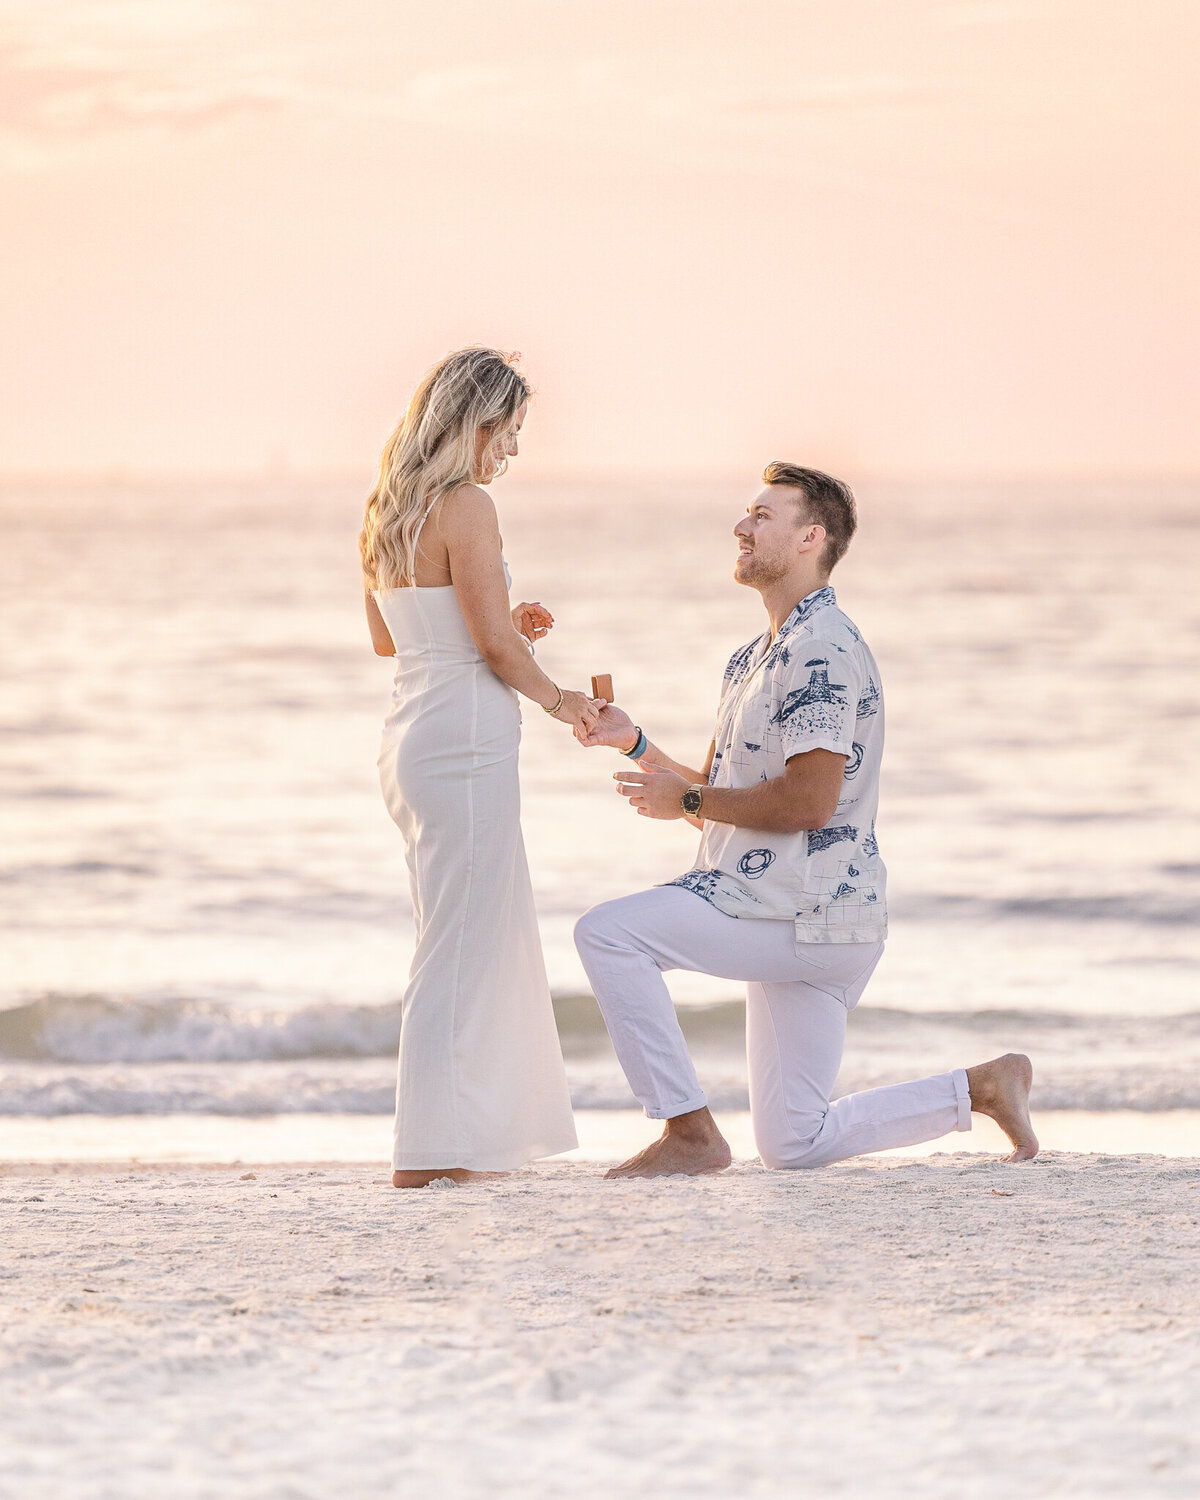 A man proposes to a woman on a beach in Clearwater, FL